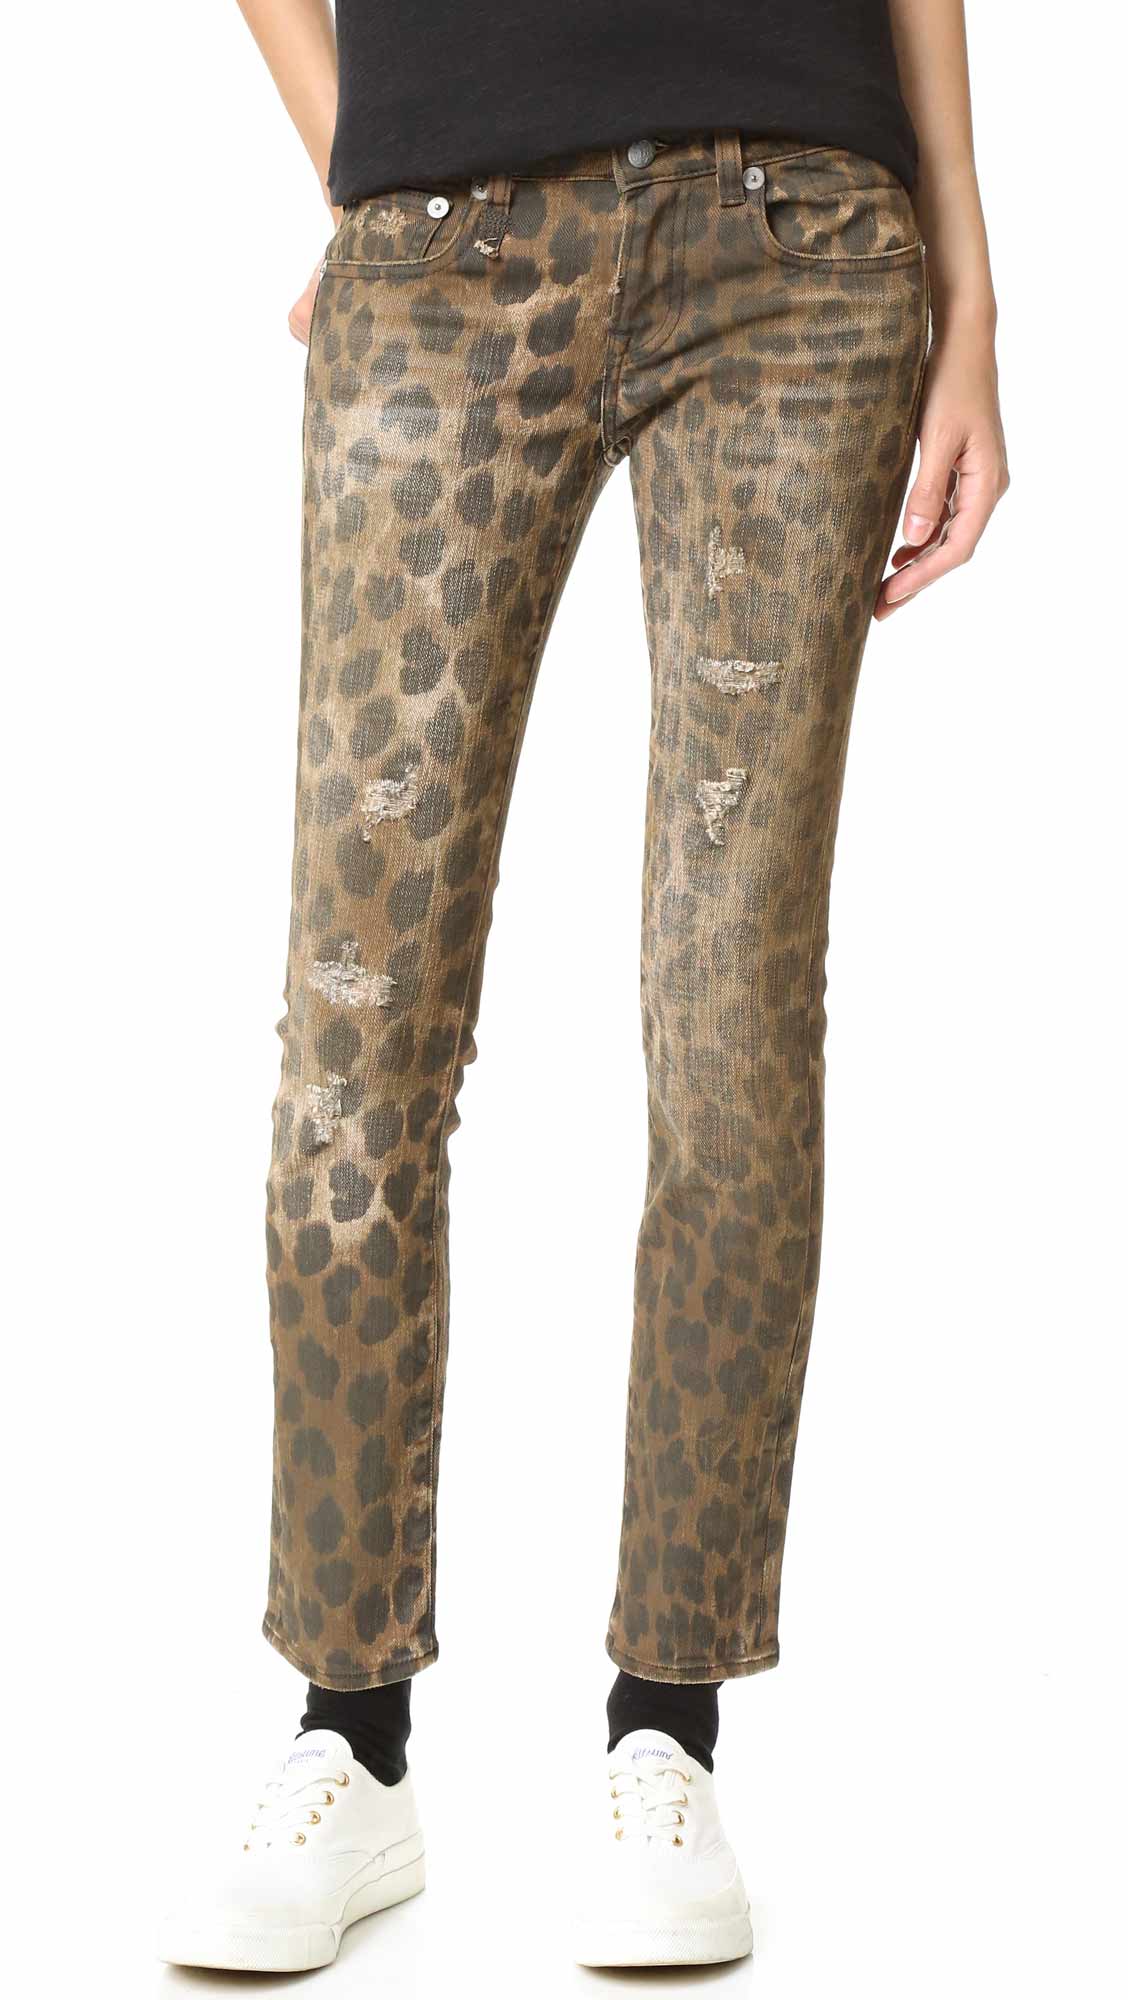 Leopard Print Denim Trend For Fall 2018 - THE JEANS BLOG